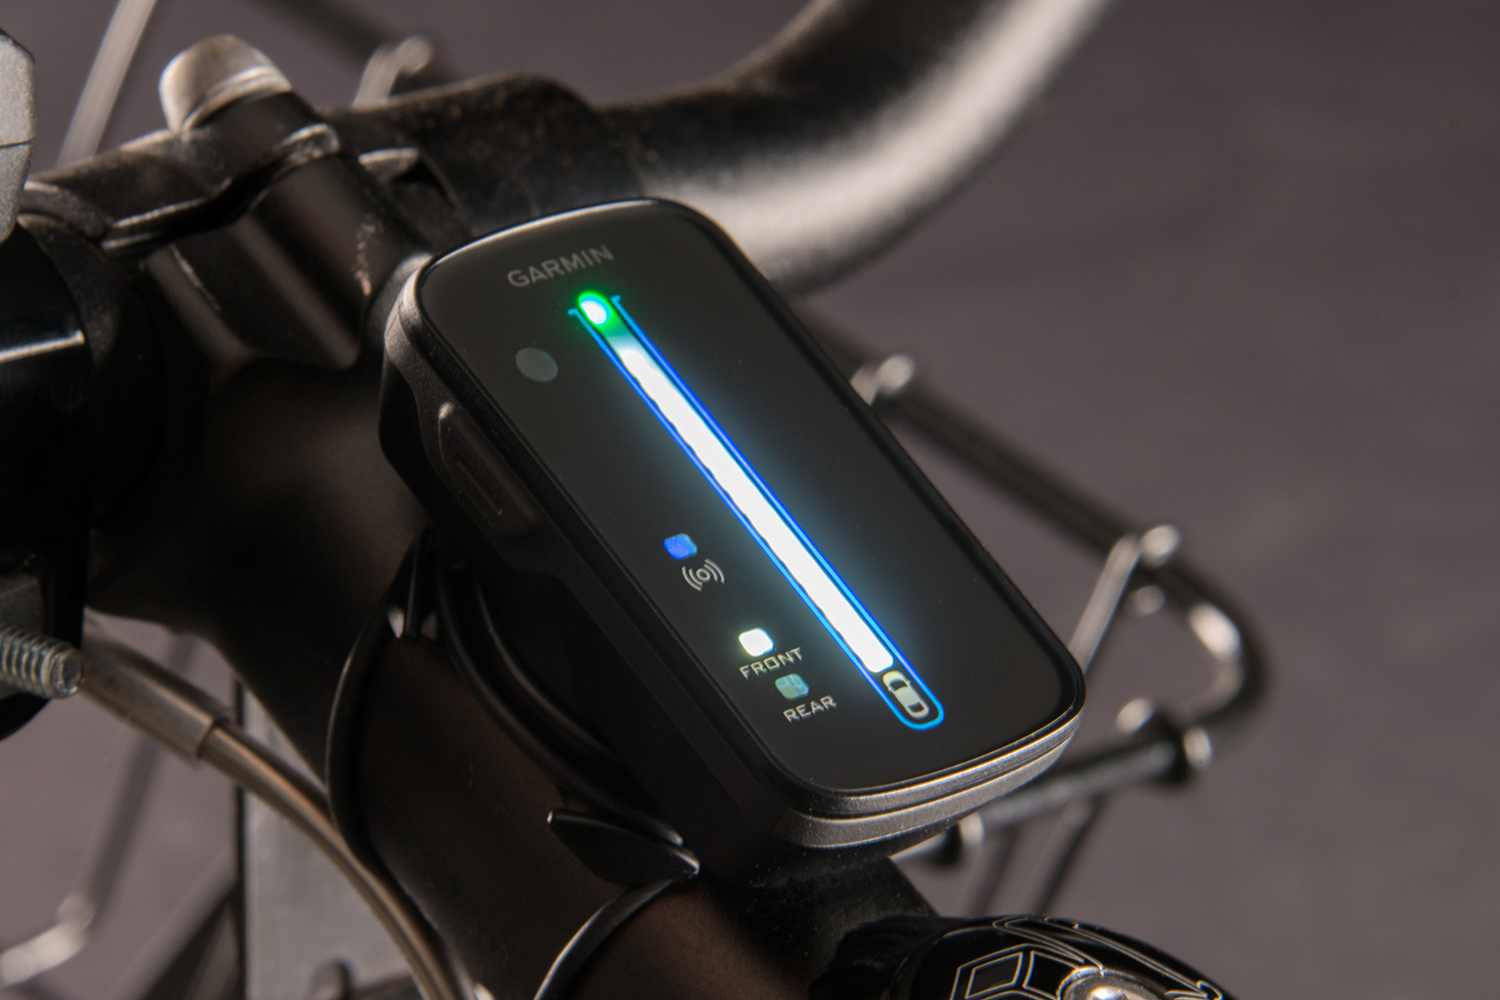 New USB Charging Cable Compatible with Garmin BMW Motorrad